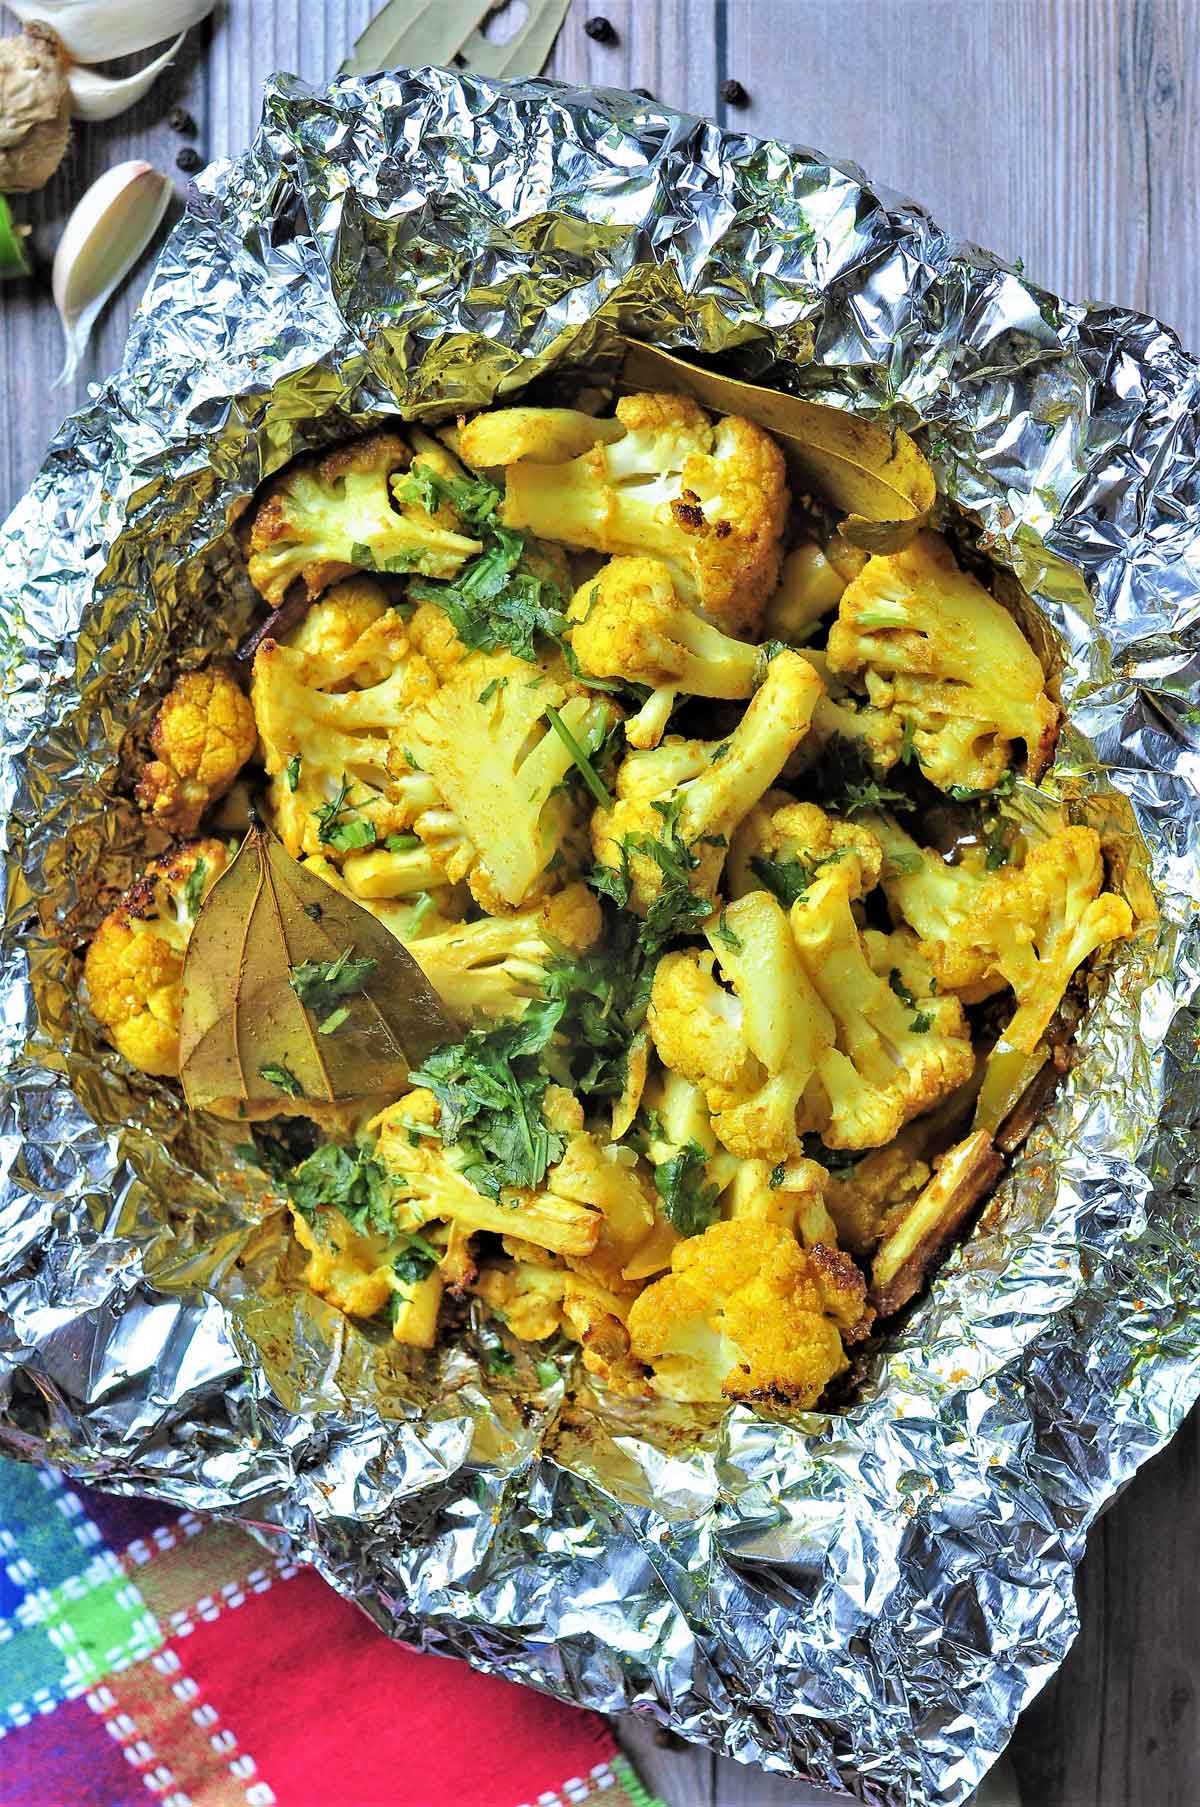 Cauliflower florets placed in a tin foil and cooked in Air Fryer.